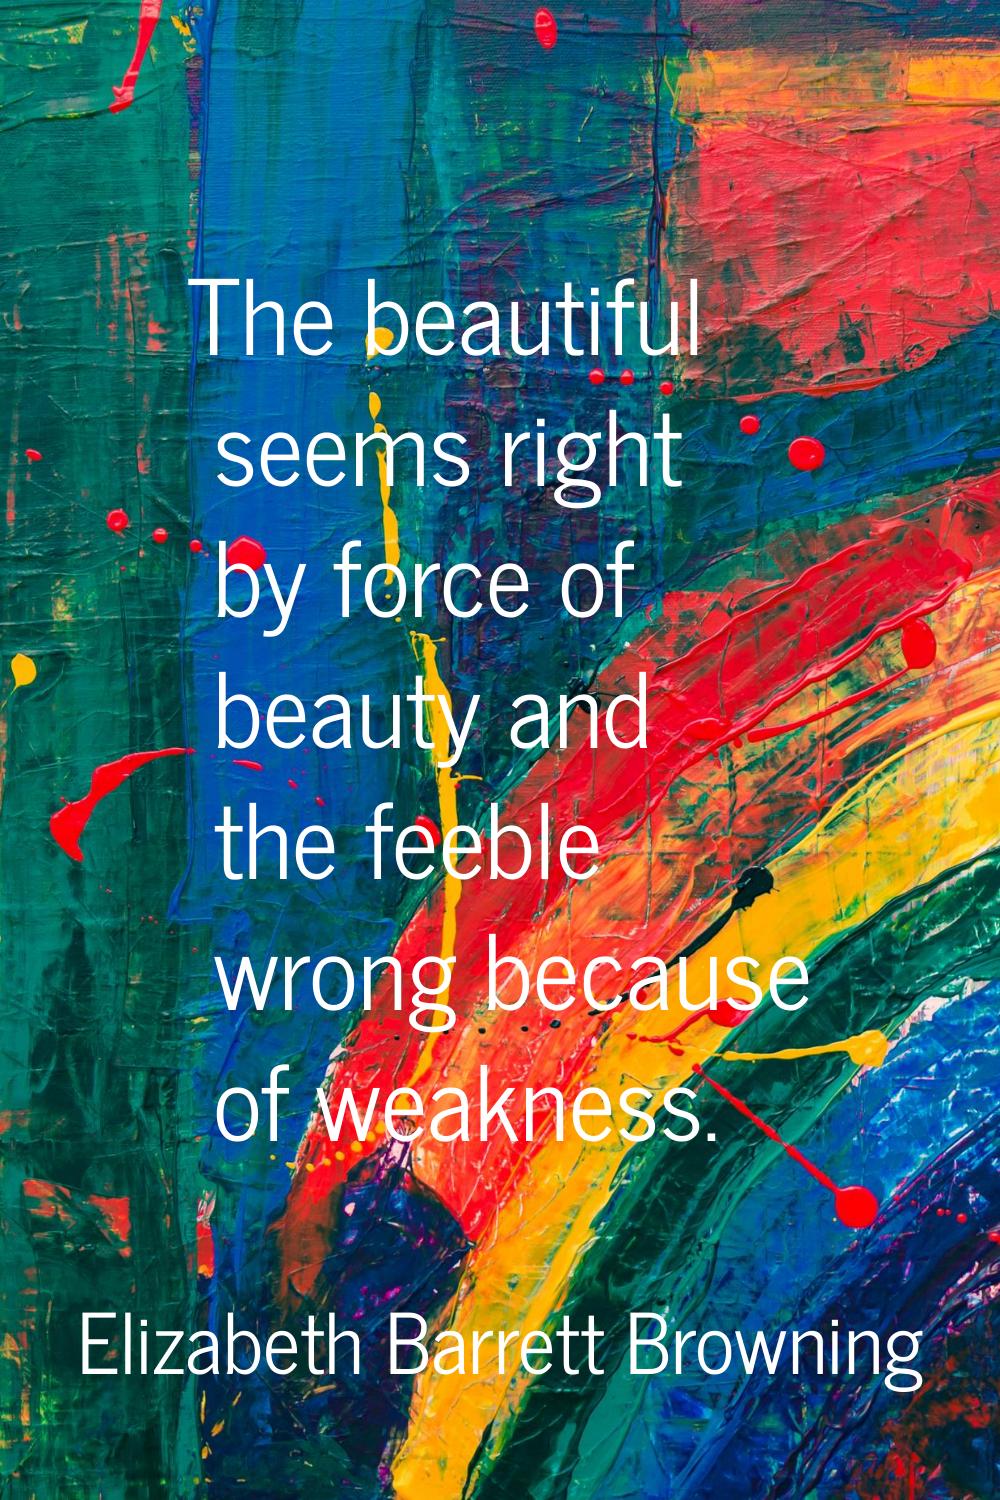 The beautiful seems right by force of beauty and the feeble wrong because of weakness.